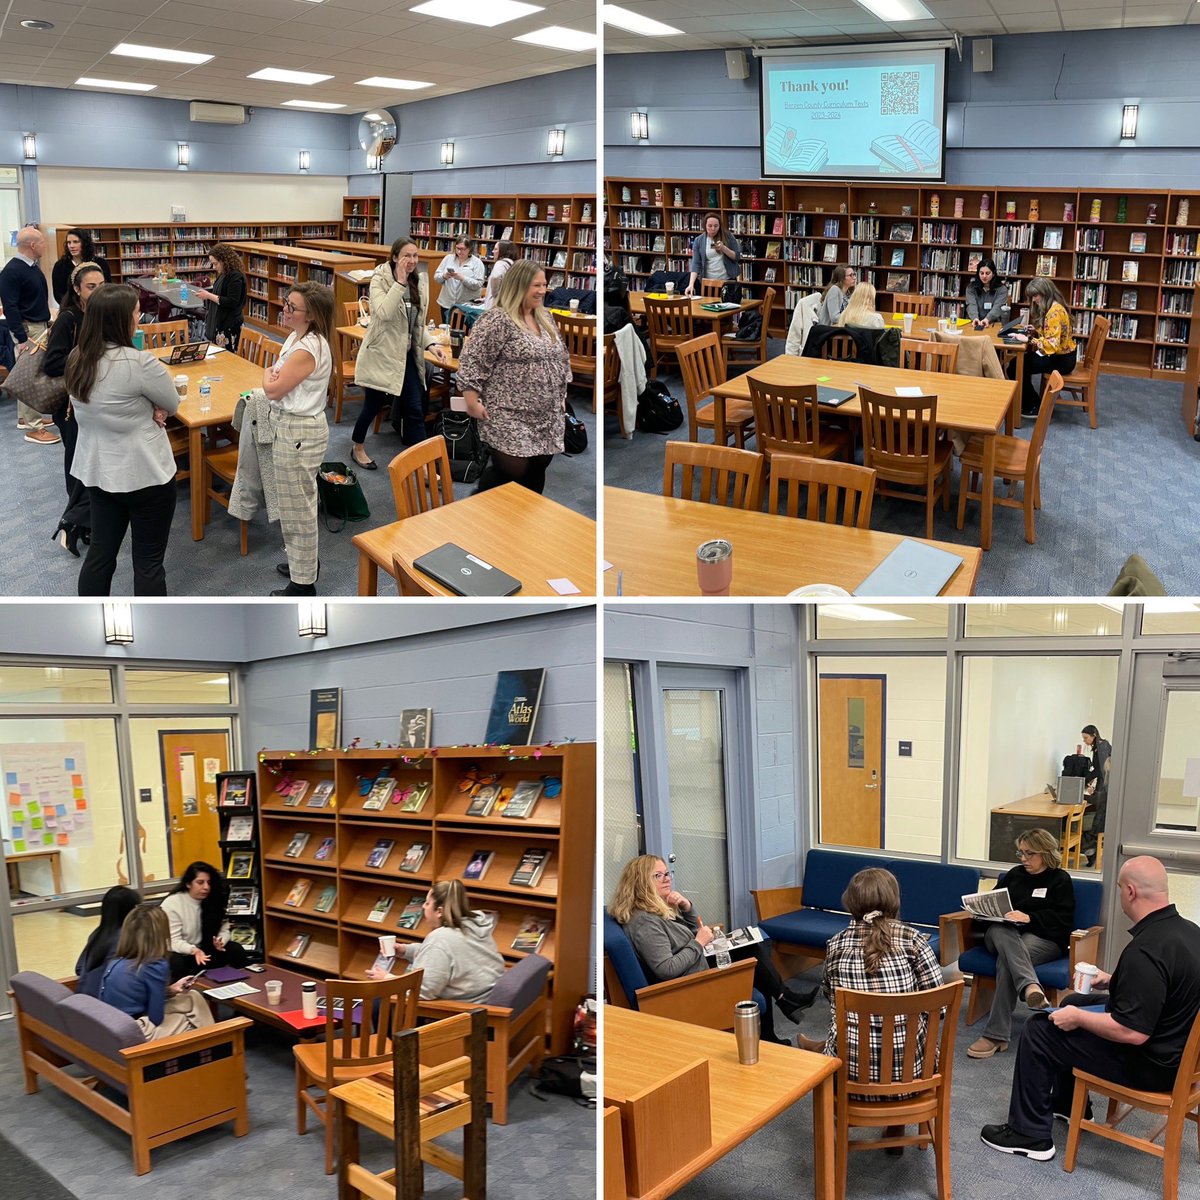 We are off to a great start with our ELA roundtable with over 30 Bergen County Language Arts Teachers gathering at Waldwick high school for a day of learning and collaborating. #njed